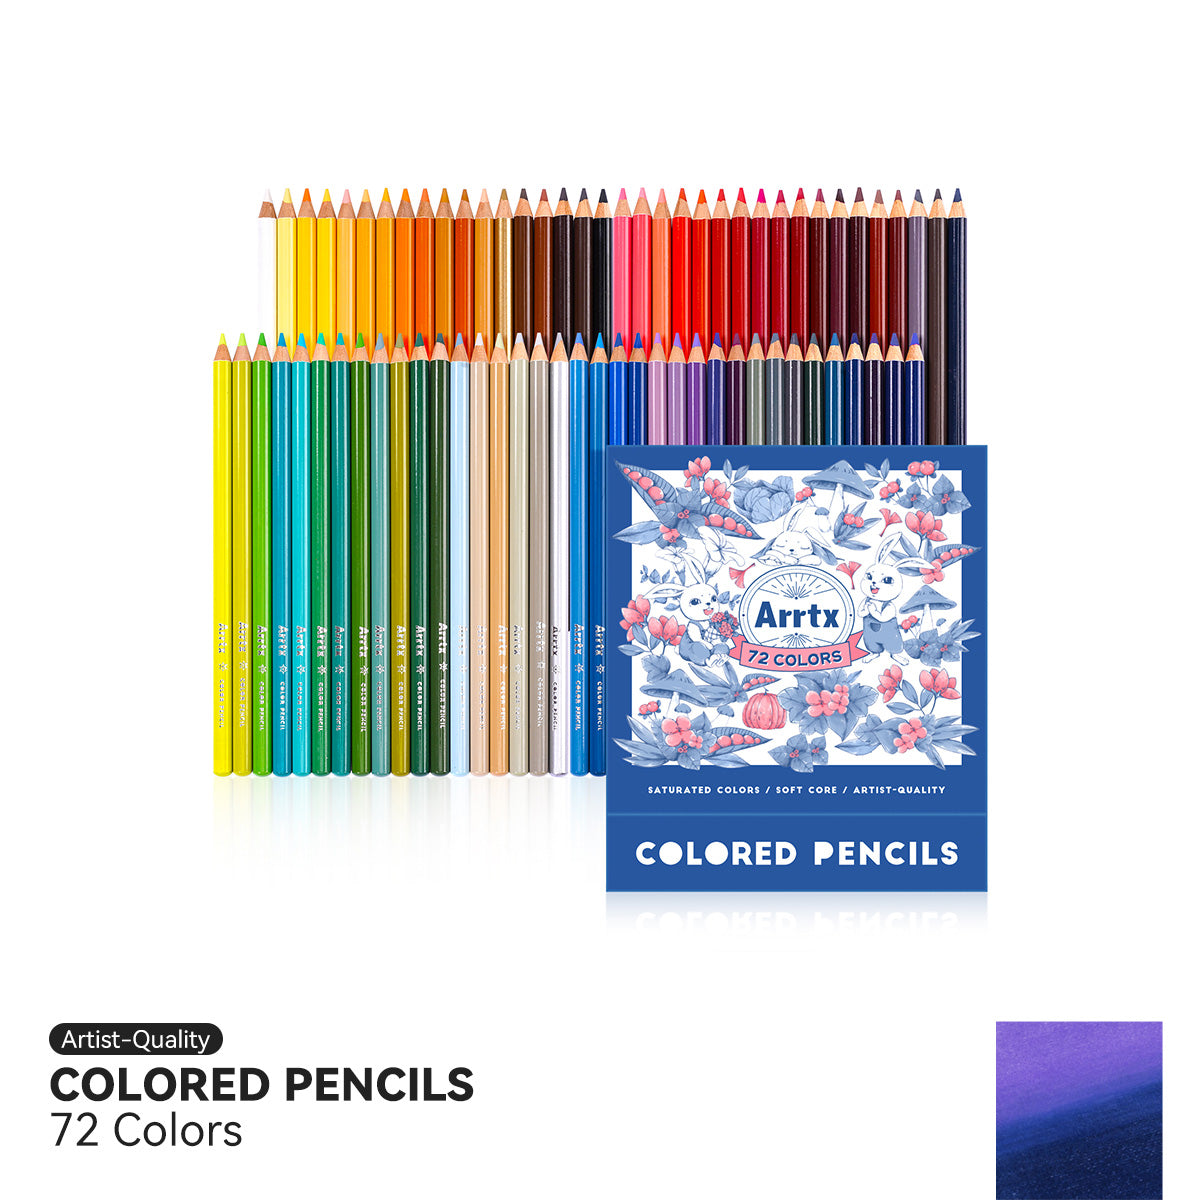 Art Supplies from abroad on Instagram: Arrtx Premium Colored Pencils 72  INSTOCK! Dm to book a set! Price: 6500/- Payment options: COD, bank  transfer or easy paisa >>>>Swipe for swatches >>>> •𝟕𝟐